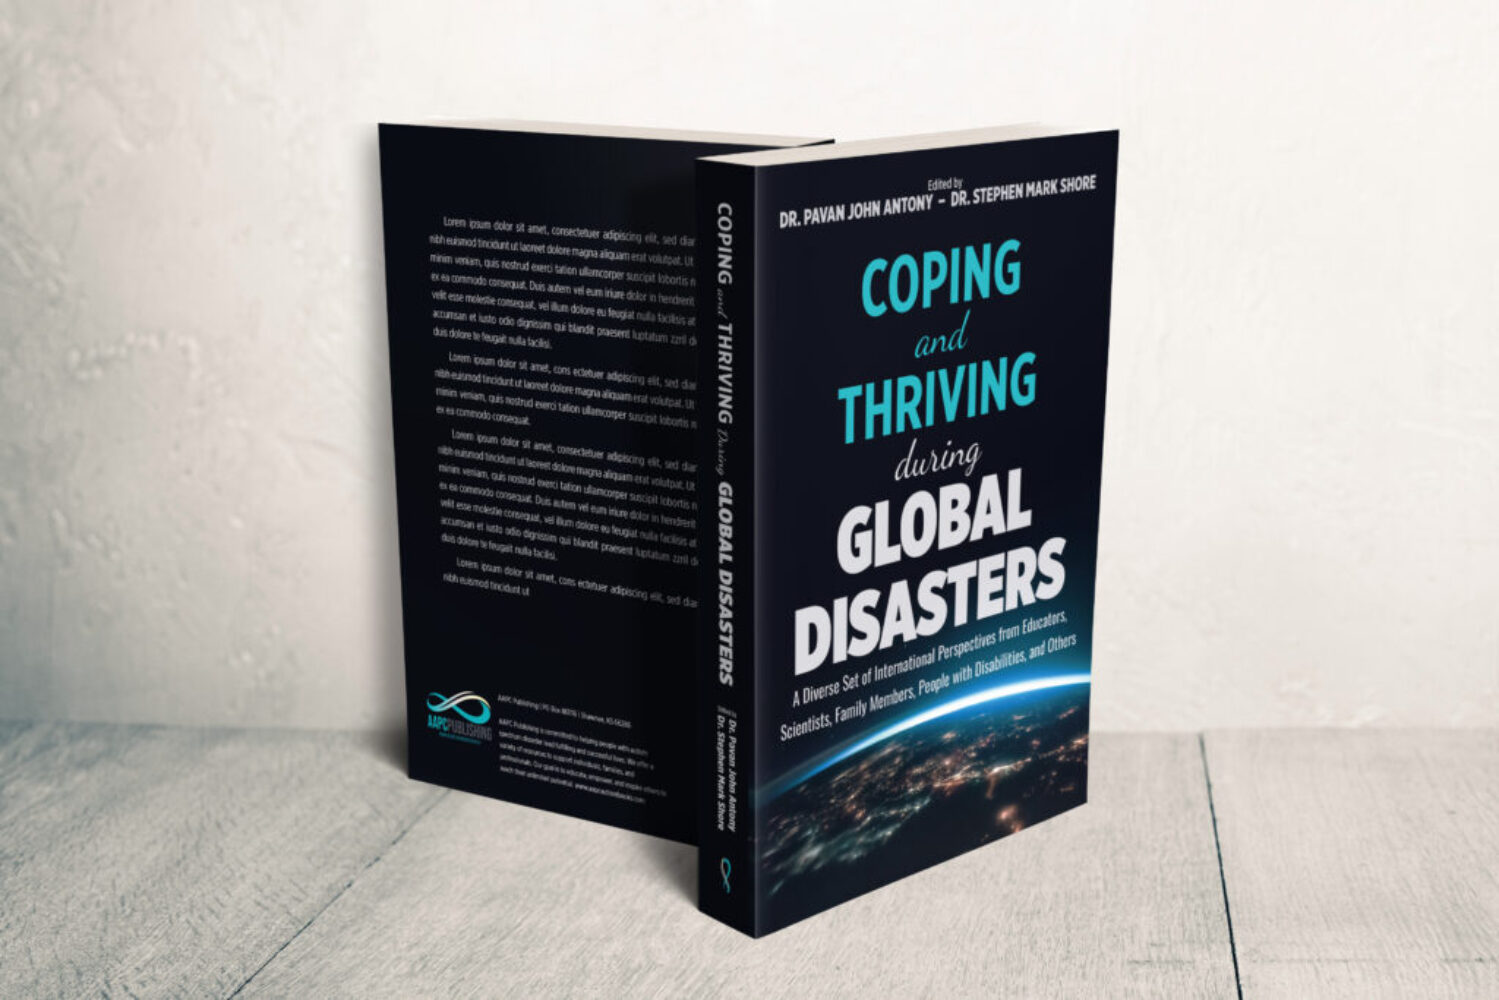 coping-and-thriving-during-global-disasters-cover